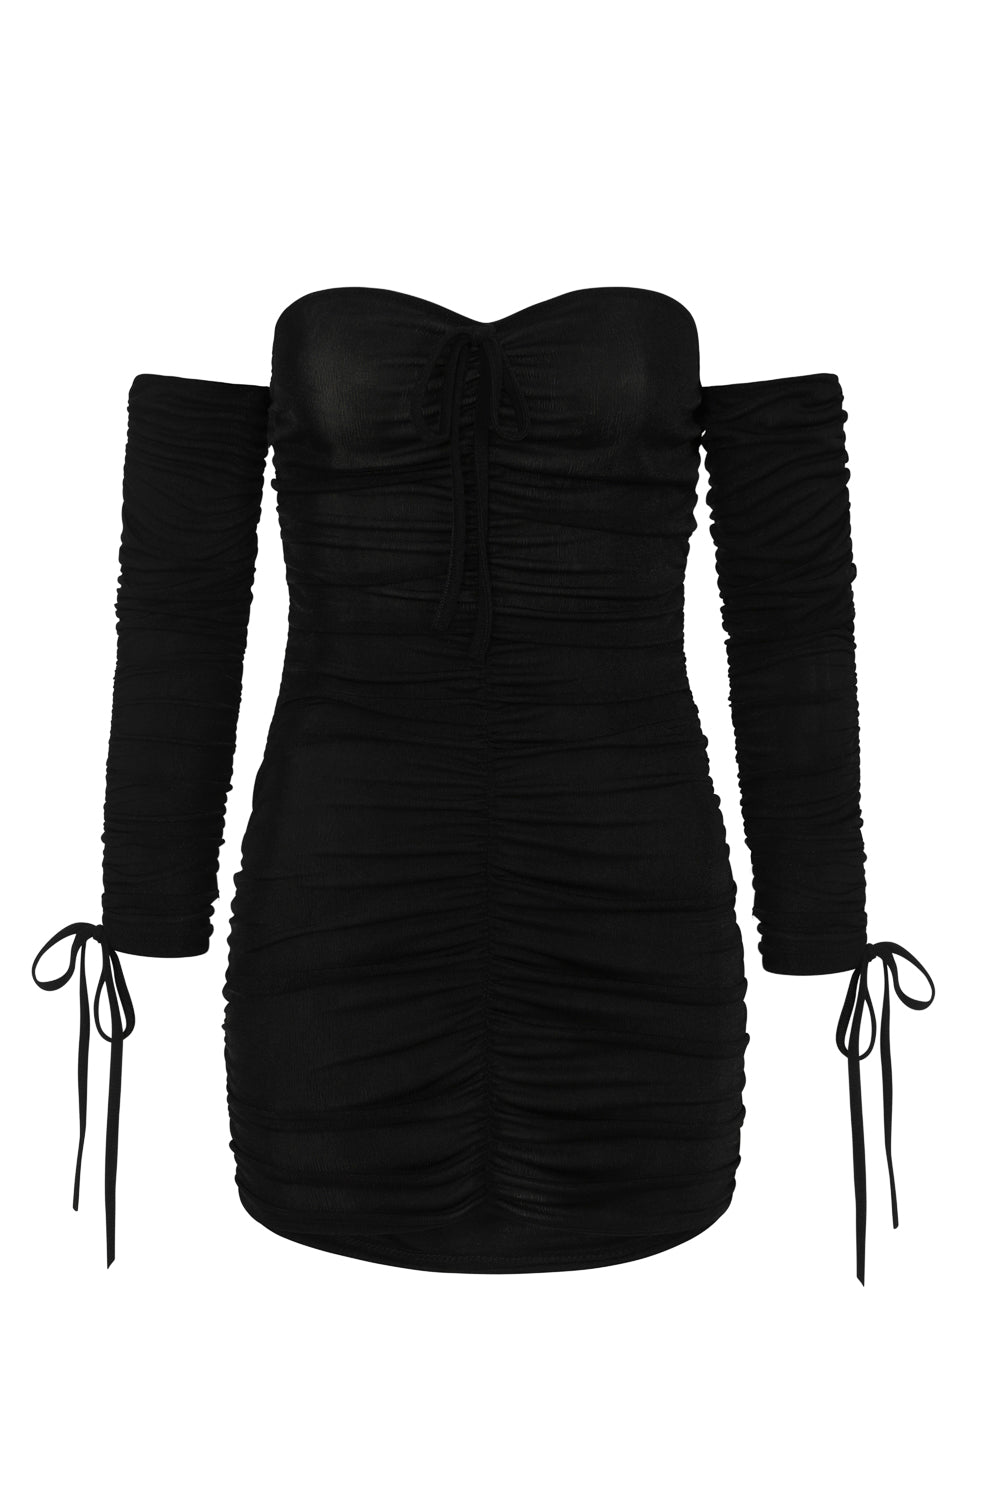 ﻿All Ruched Up Black Off The Shoulder Long Sleeve Slinky Mini Dress